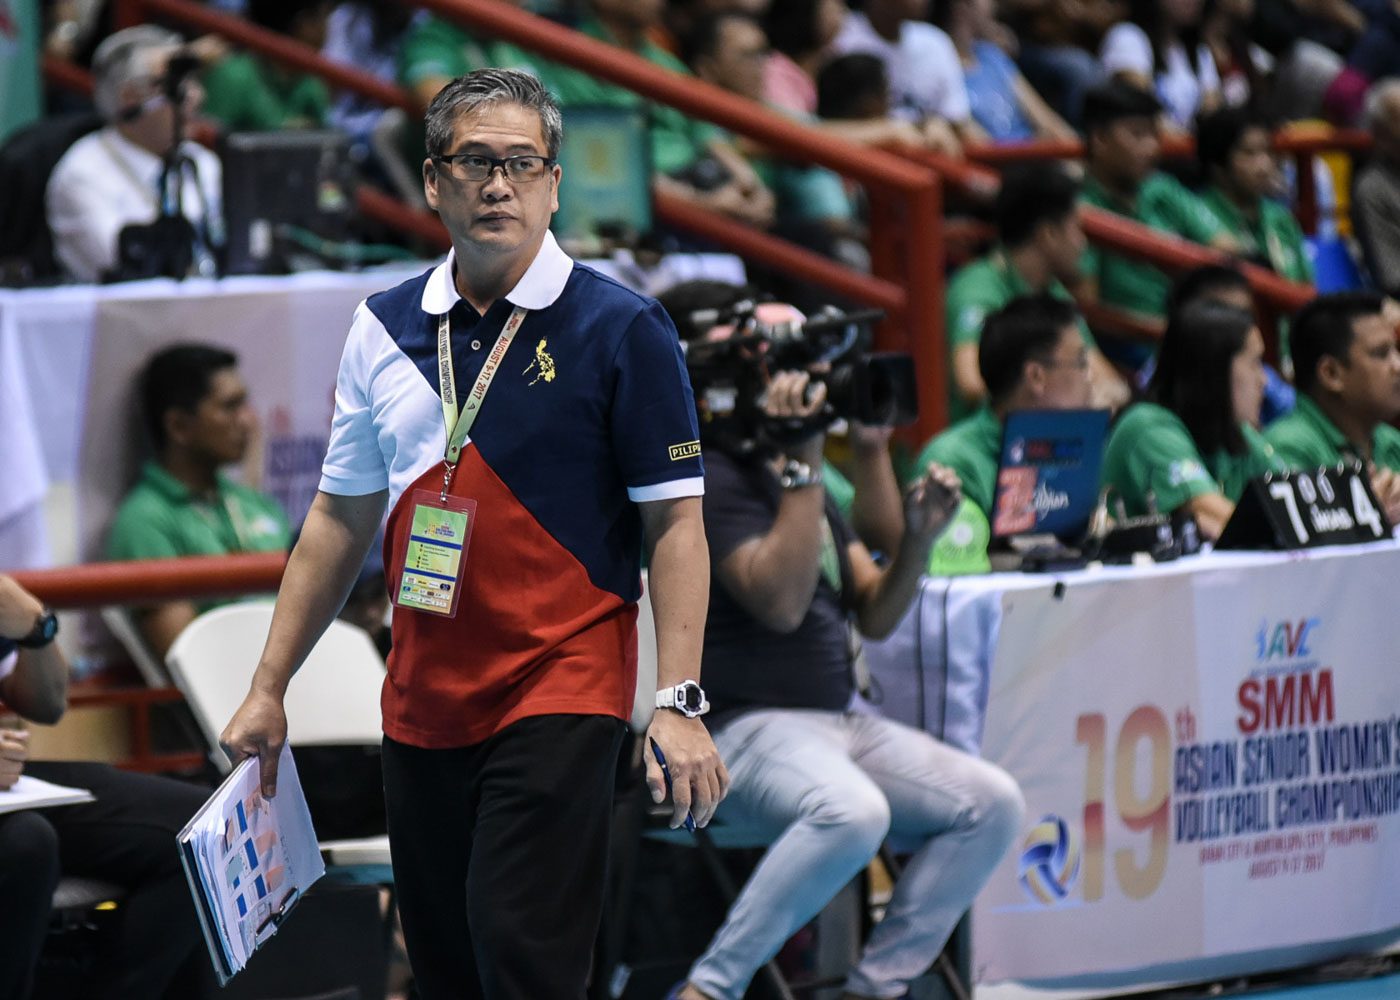 Philippine coach Francis Vicente watches on. Photo by Jerrick Esguerra/Rappler 